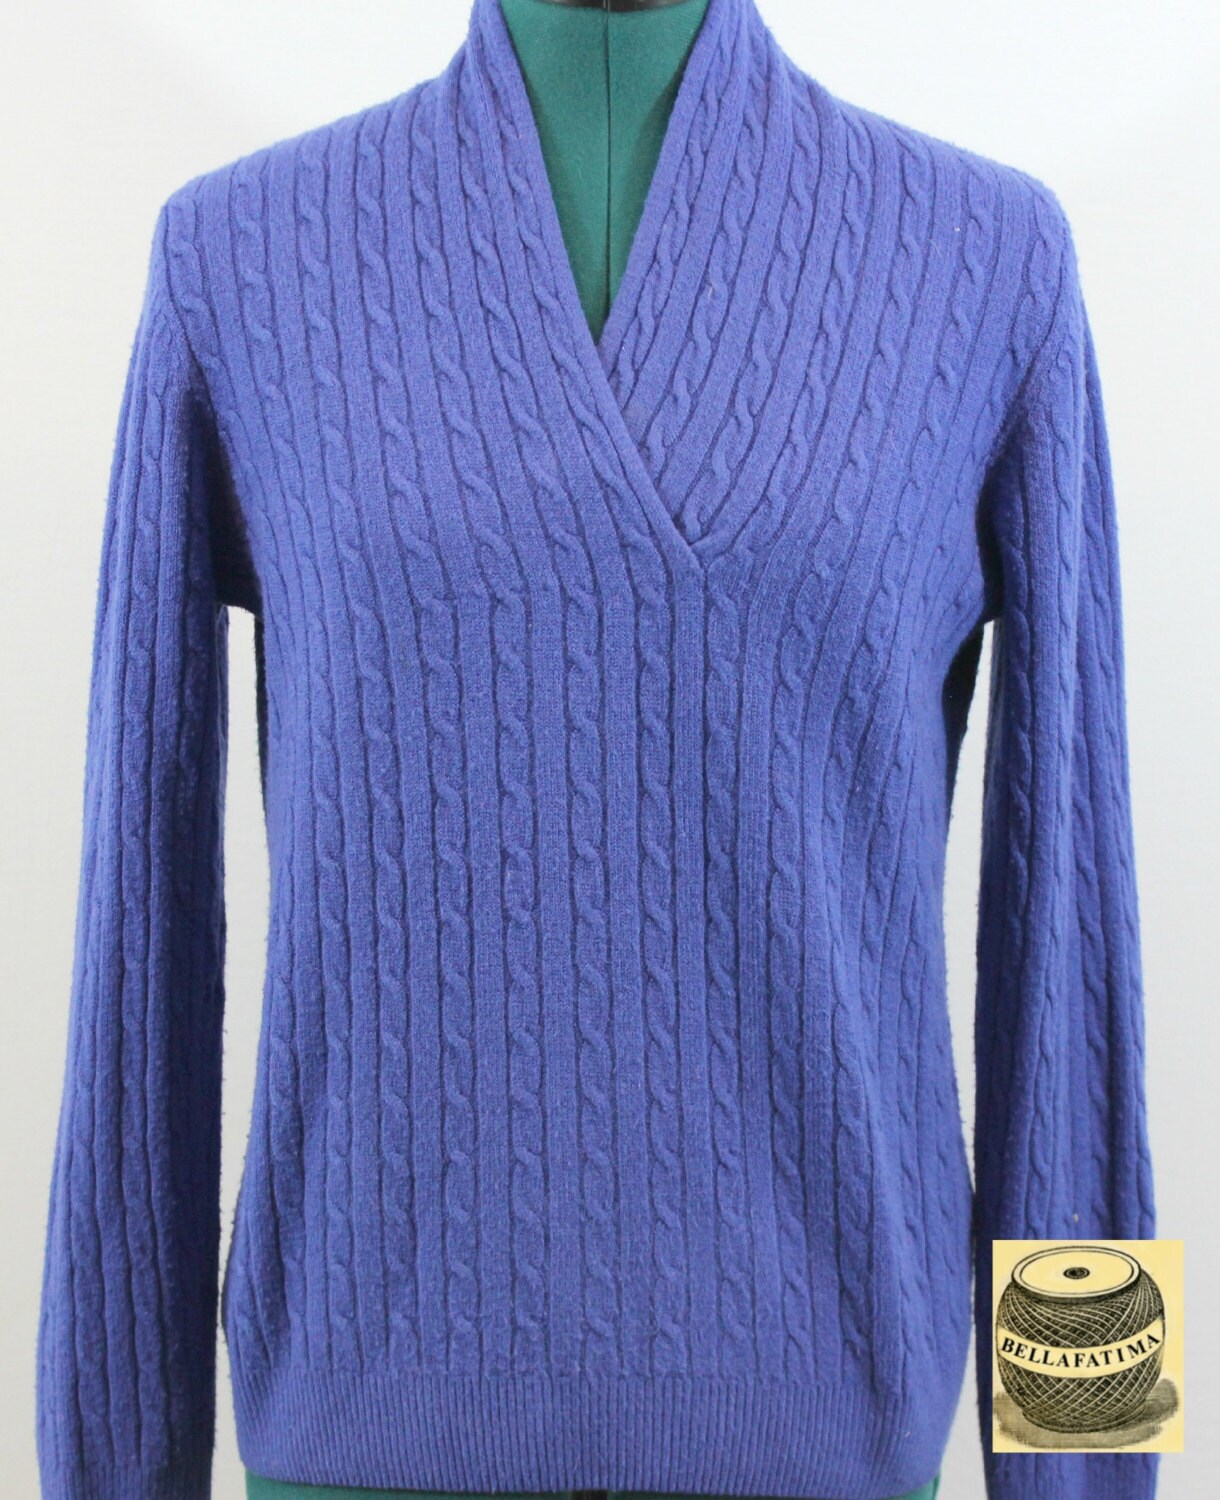 Royal Blue cable knit sweater with high v-neckline. By TanJay | Etsy